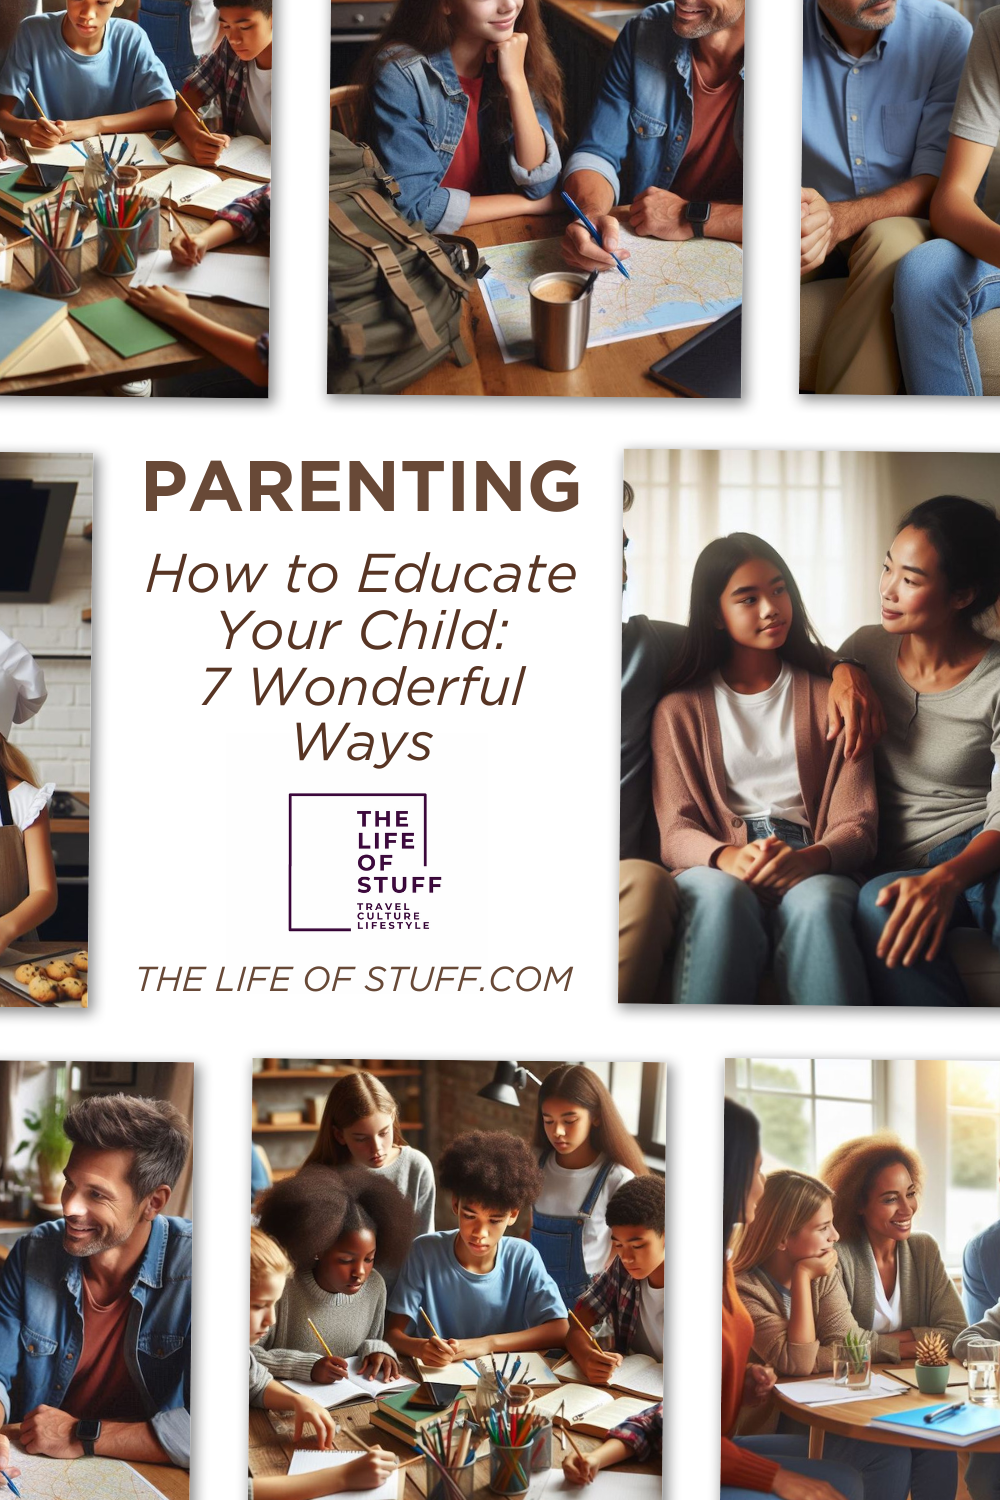 How to Educate Your Child - THE LIFE OF STUFF